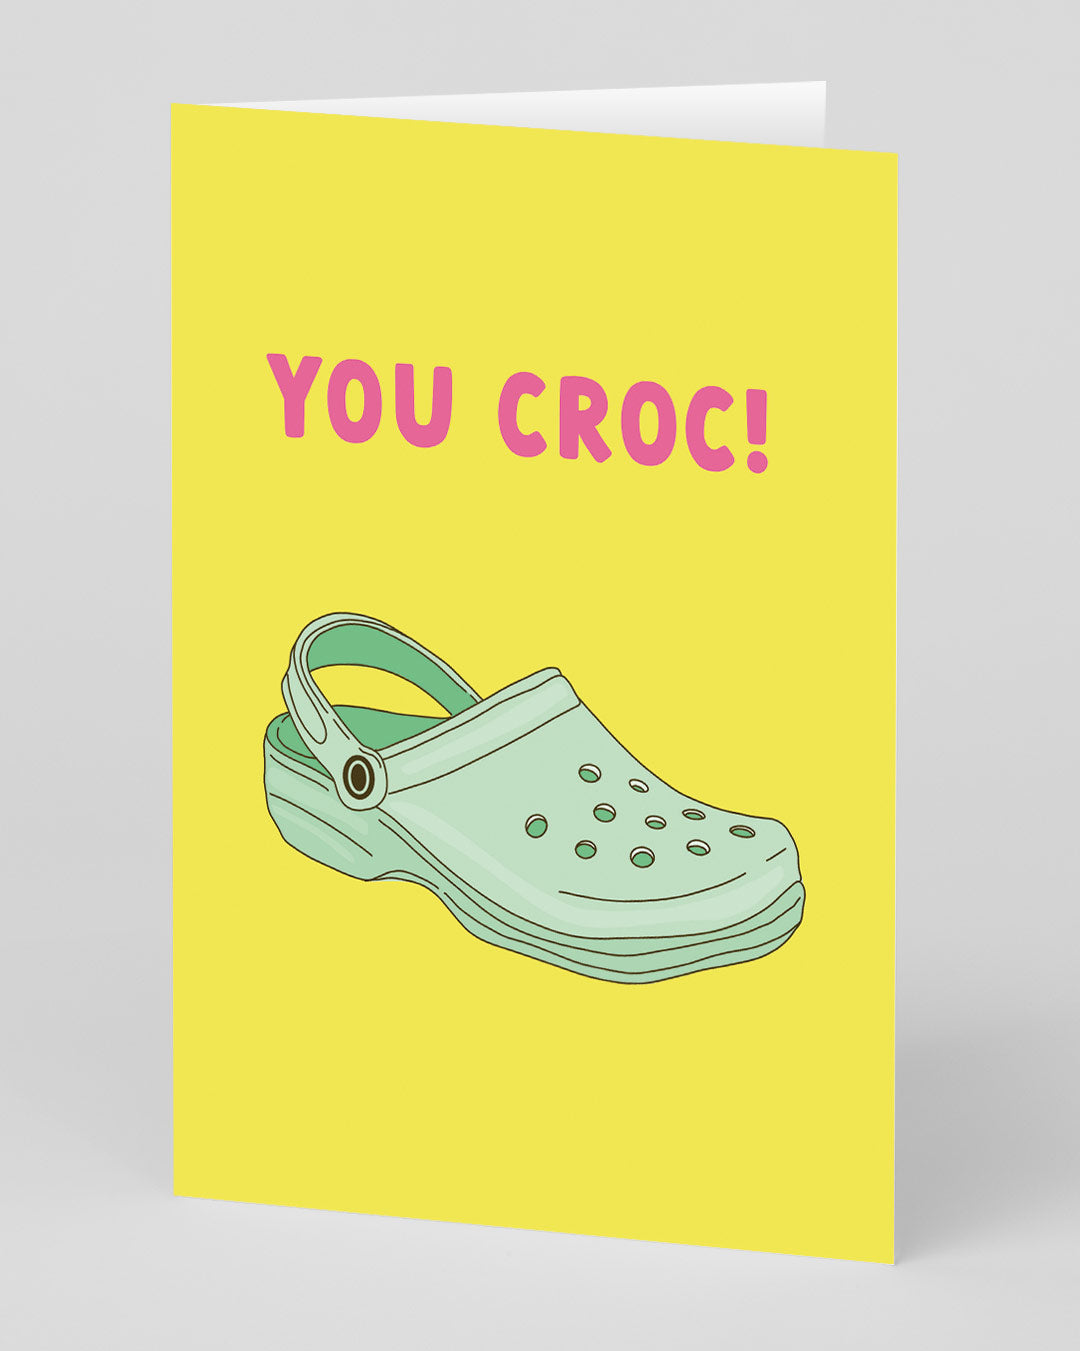 Valentine’s Day | Funny Valentines Card For Croc Wearers | You Croc Greeting Card | Ohh Deer Unique Valentine’s Card for Him or Her | Made In The UK, Eco-Friendly Materials, Plastic Free Packaging